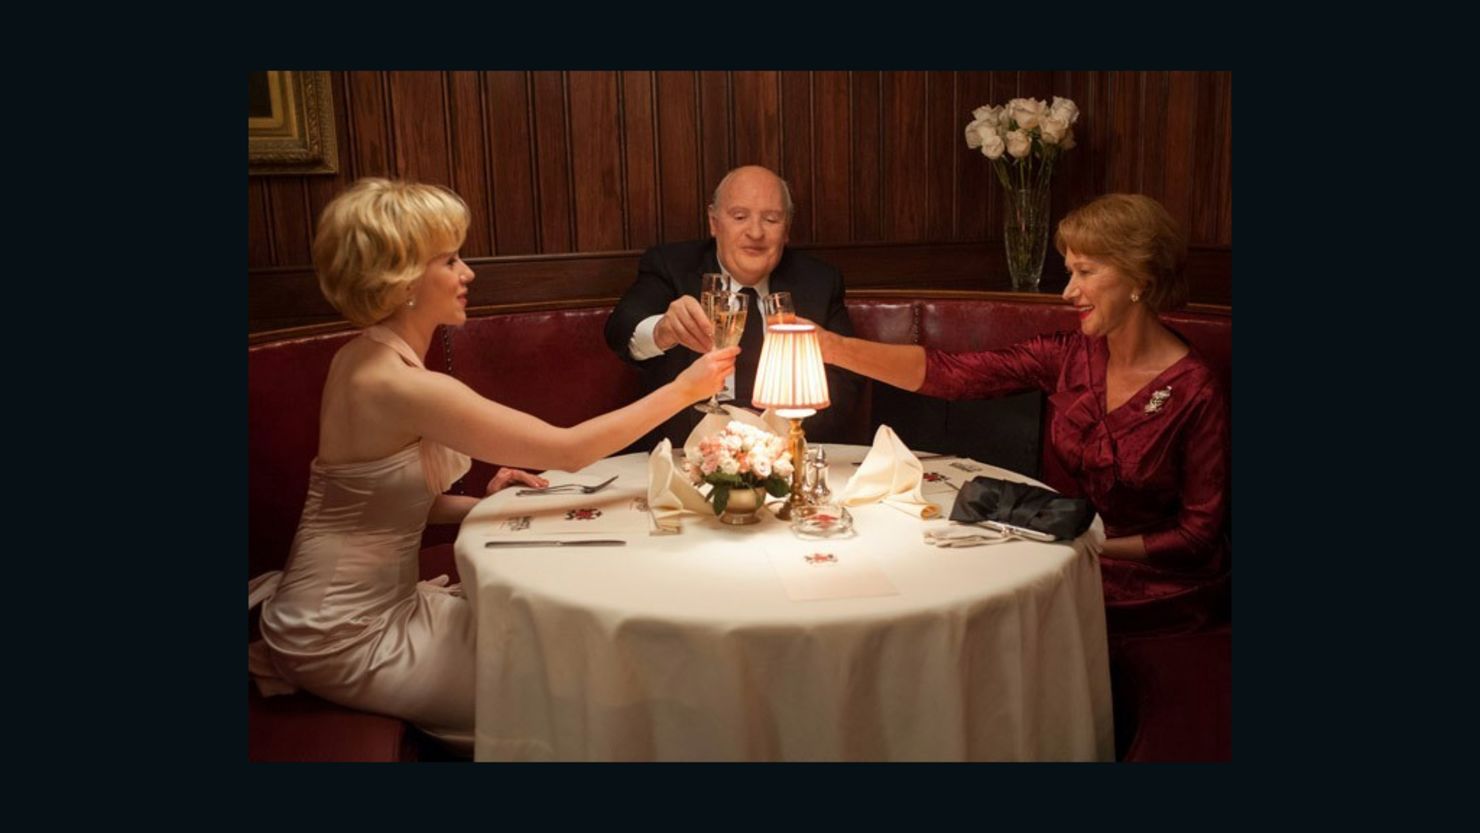 "Hitchcock" stars Scarlett Johansson as Janet Leigh, Anthony Hopkins as the director and Helen Mirren as his wife, Alma Reville.